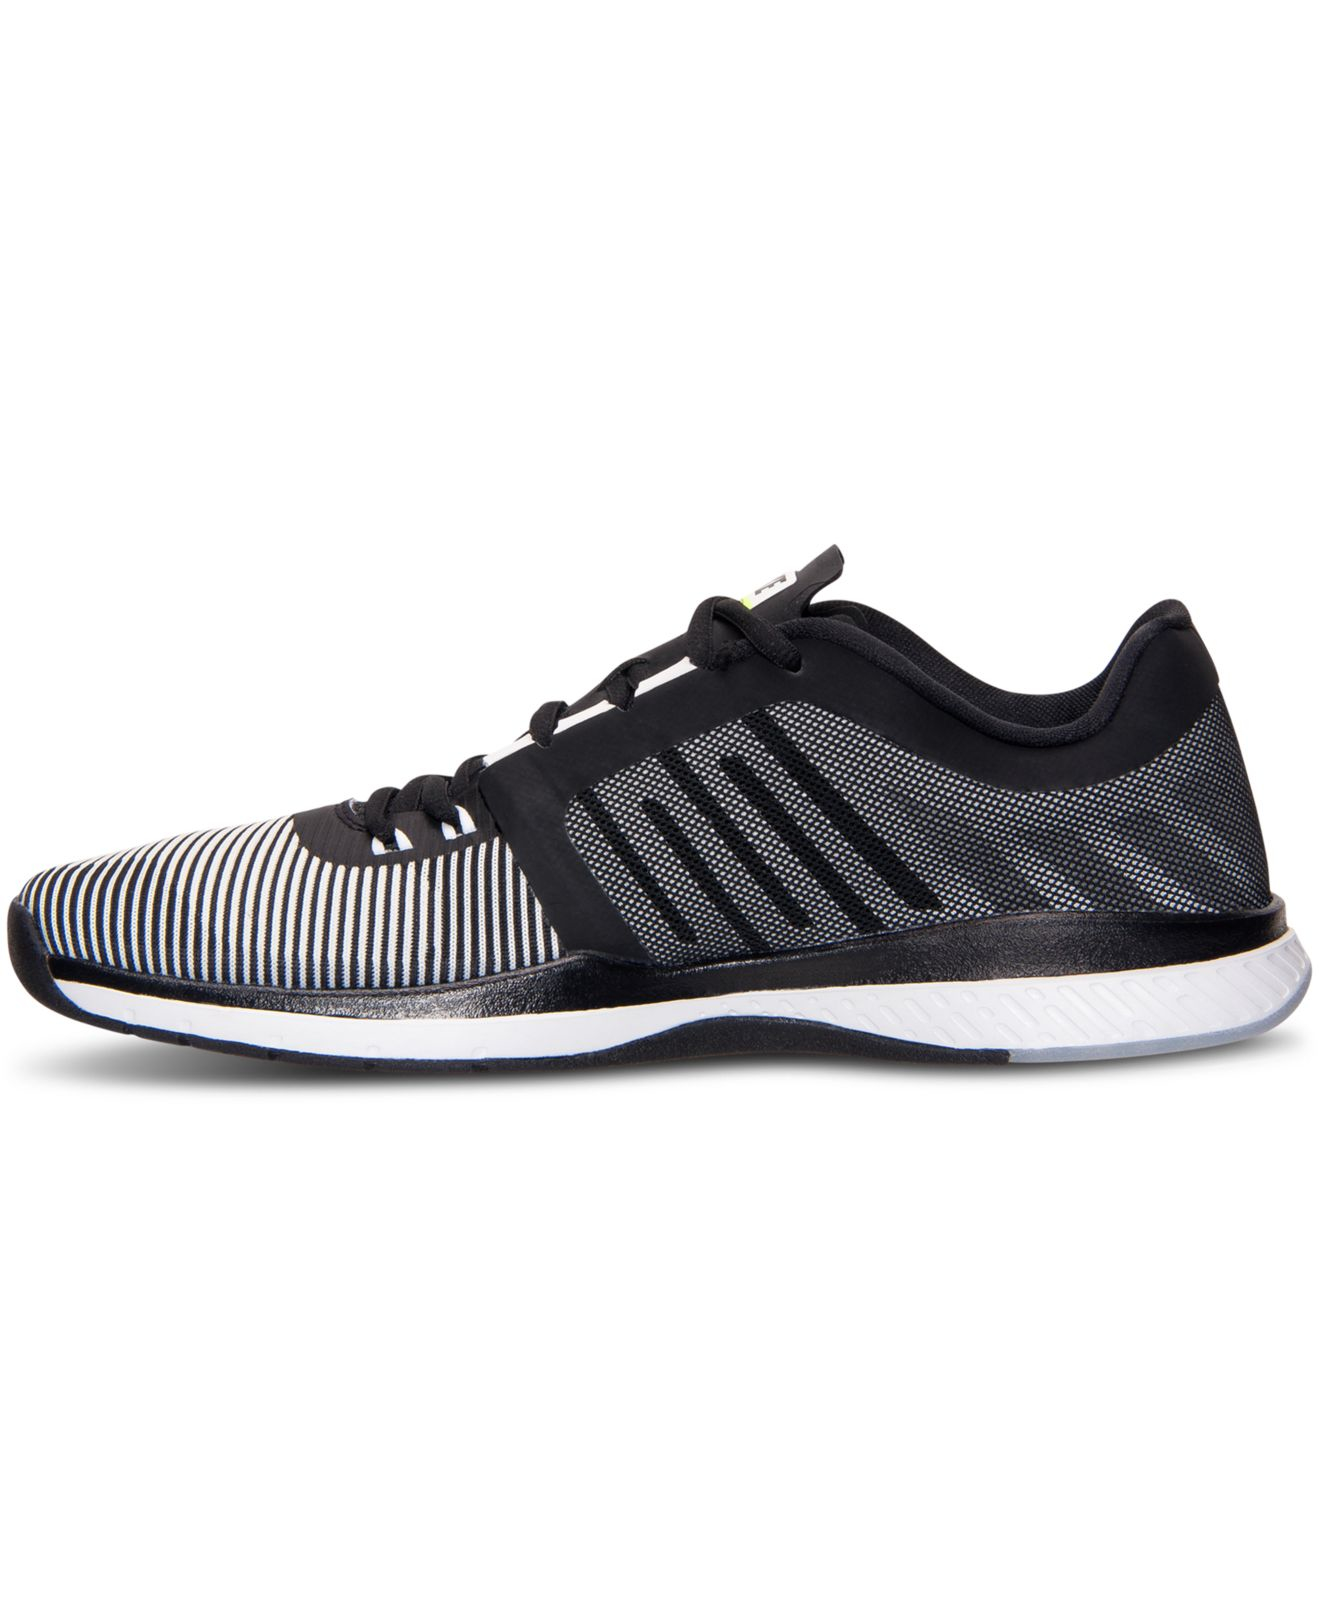 Nike Synthetic Zoom Speed Tr 2015 Training Sneakers From Finish Line in Black Men Lyst